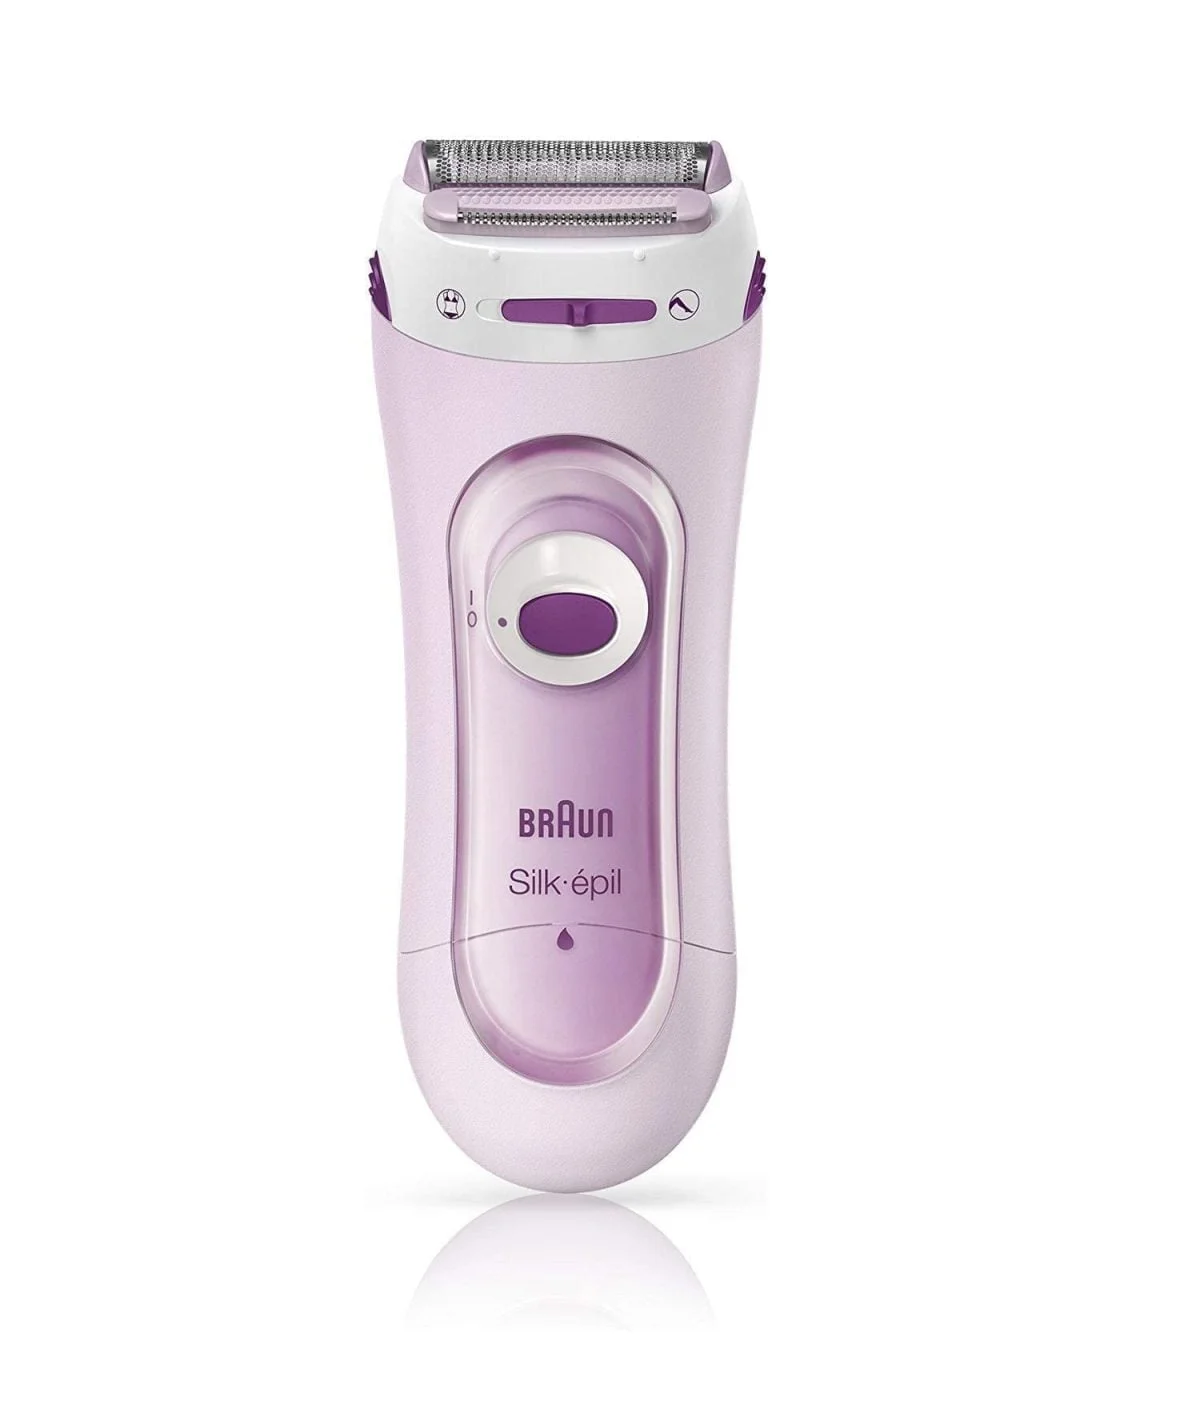 Braun &Lt;H1&Gt;Braun Silk-Épil Lady Shaver 5-103 - Cordless Electric Shaver And Trimmer System&Lt;/H1&Gt; Https://Www.youtube.com/Watch?V=2Fxya7Wkq6O &Lt;Ul Class=&Quot;A-Unordered-List A-Vertical A-Spacing-Mini&Quot;&Gt; &Lt;Li&Gt;&Lt;Span Class=&Quot;A-List-Item&Quot;&Gt; Cordless Electric Lady Shaver &Lt;/Span&Gt;&Lt;/Li&Gt; &Lt;Li&Gt;&Lt;Span Class=&Quot;A-List-Item&Quot;&Gt; Floating Foil And Trimmer For A Close Shave On Legs, Underarms Or Bikini Line &Lt;/Span&Gt;&Lt;/Li&Gt; &Lt;Li&Gt;&Lt;Span Class=&Quot;A-List-Item&Quot;&Gt; Rounded Head Adapts To Body Contours &Lt;/Span&Gt;&Lt;/Li&Gt; &Lt;Li&Gt;&Lt;Span Class=&Quot;A-List-Item&Quot;&Gt; 1 Extra: Trimmer Cap For Bikini Line And Sensitive Areas &Lt;/Span&Gt;&Lt;/Li&Gt; &Lt;Li&Gt;&Lt;Span Class=&Quot;A-List-Item&Quot;&Gt; 2Xaa Batteries Are Included &Lt;/Span&Gt;&Lt;/Li&Gt; &Lt;/Ul&Gt; Lady Shaver Braun Silk-Épil Lady Shaver - Ls 5100